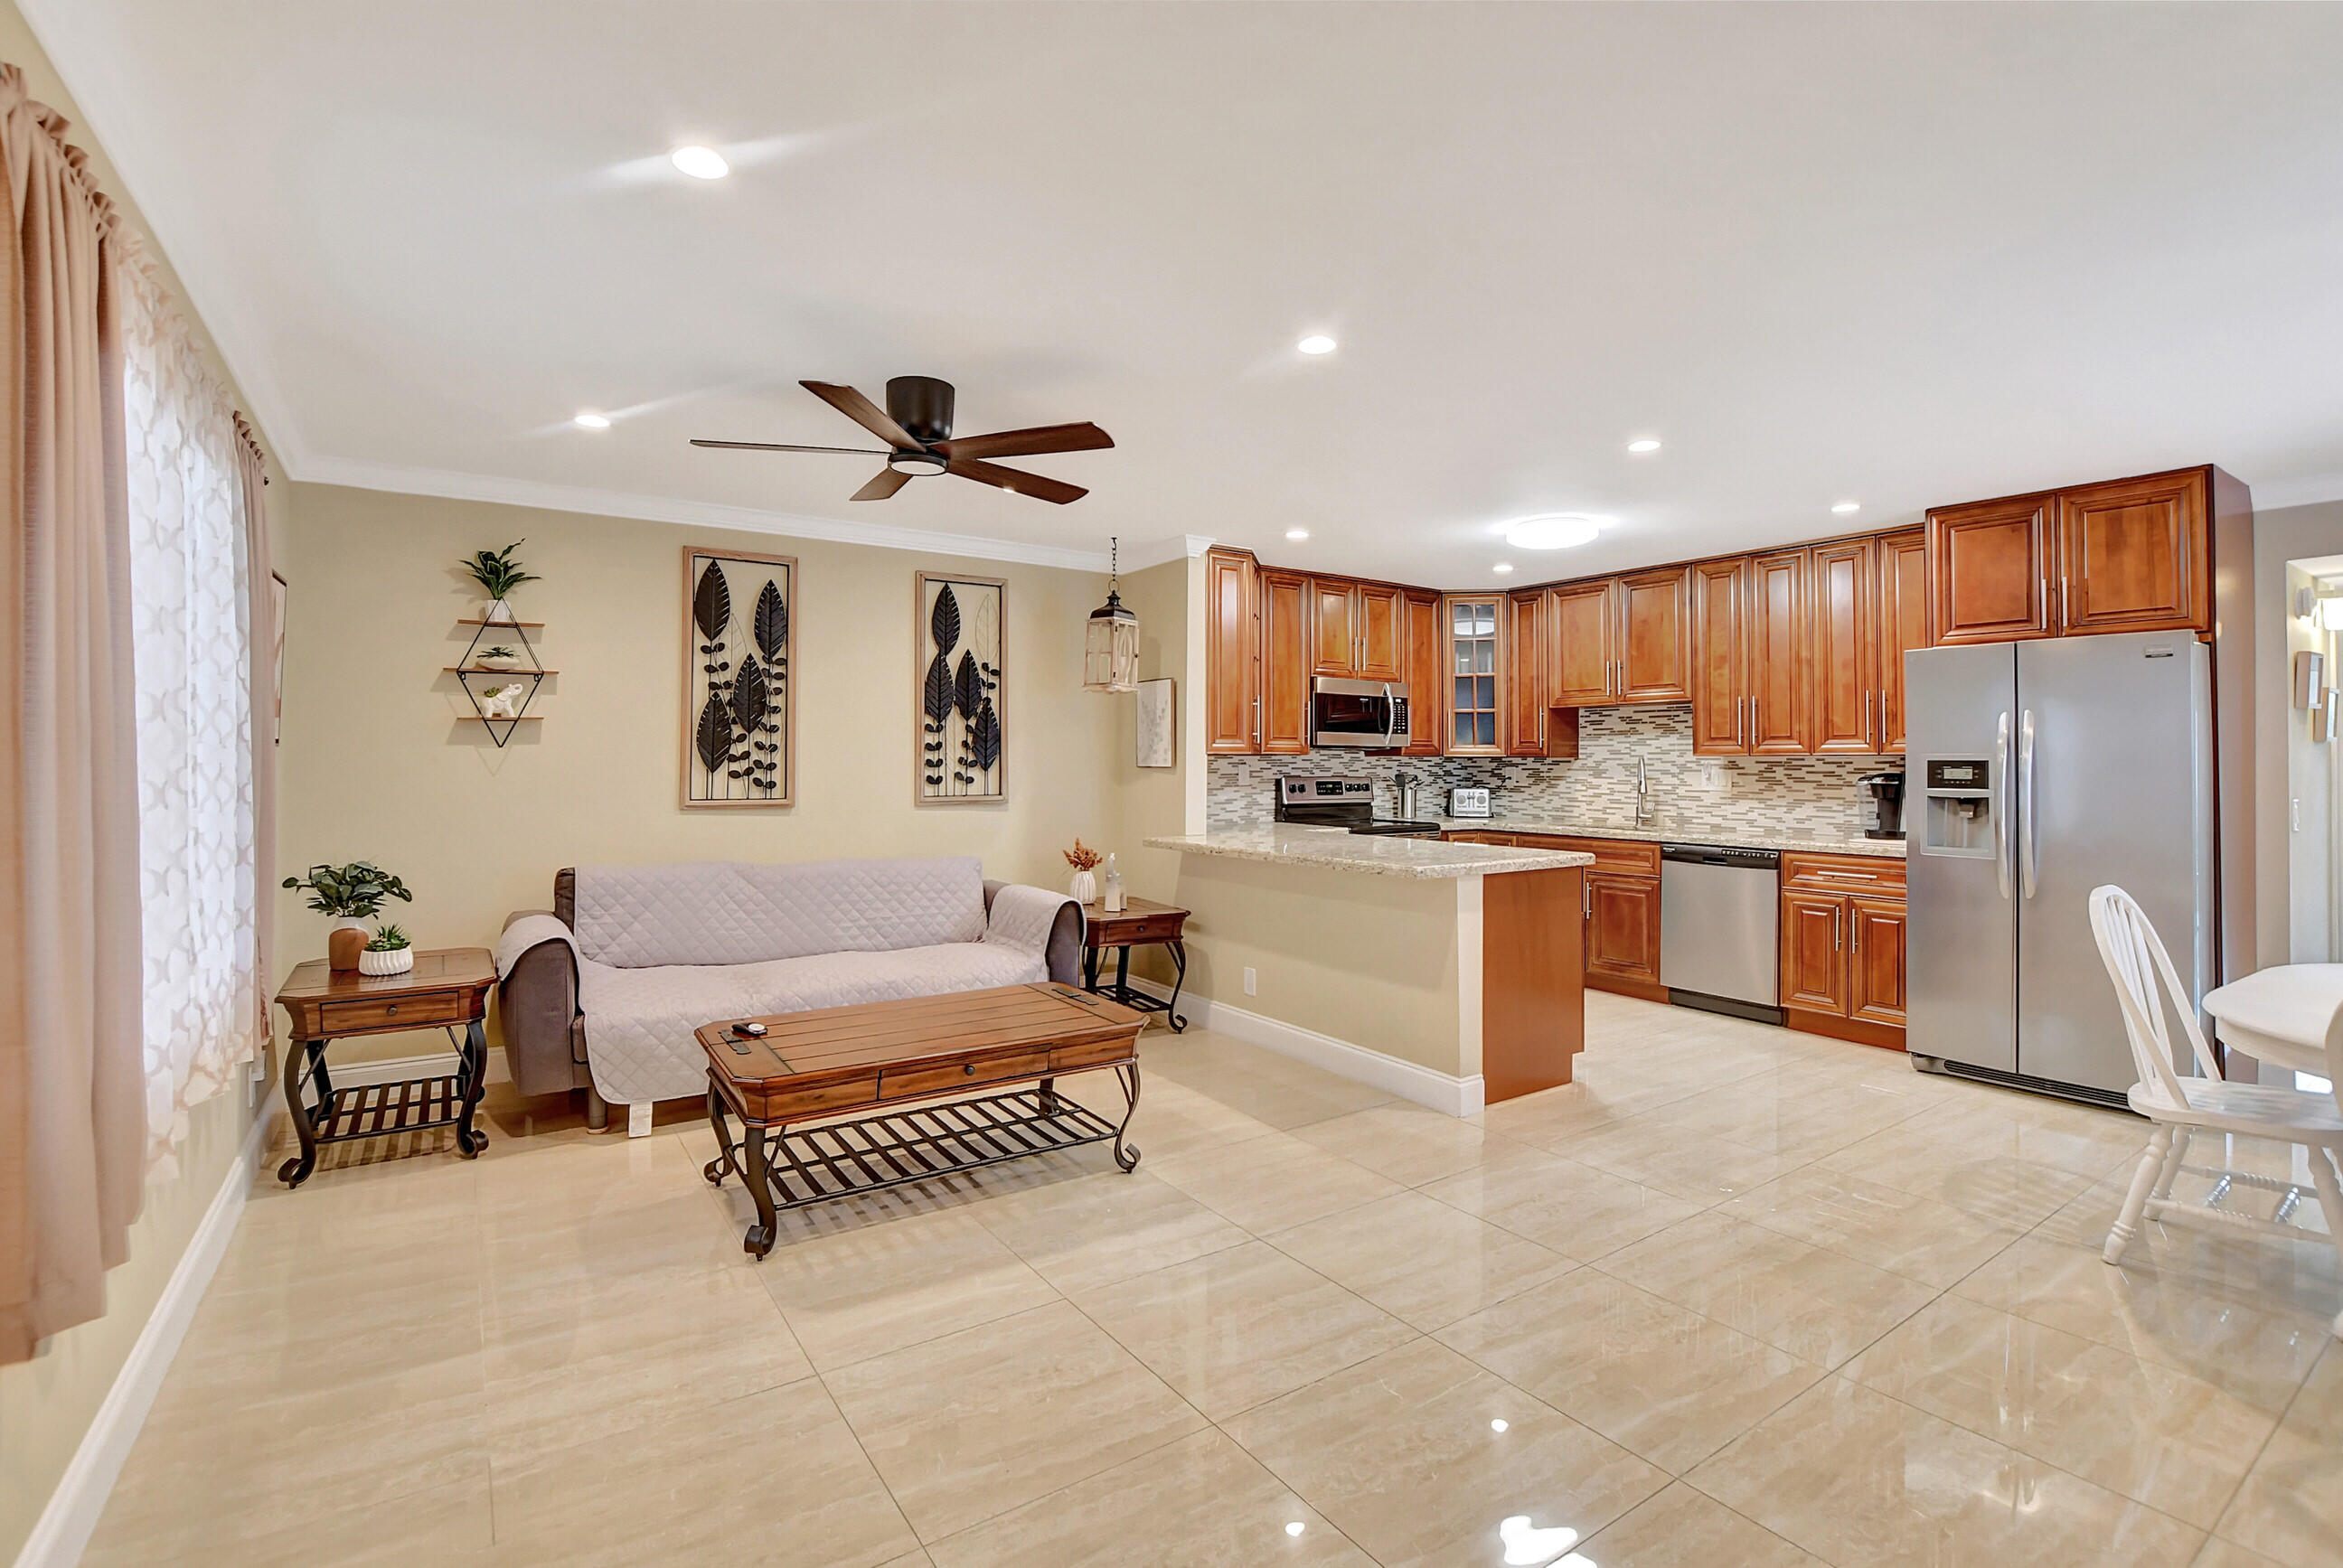 a large living room with stainless steel appliances kitchen island granite countertop furniture and a large window